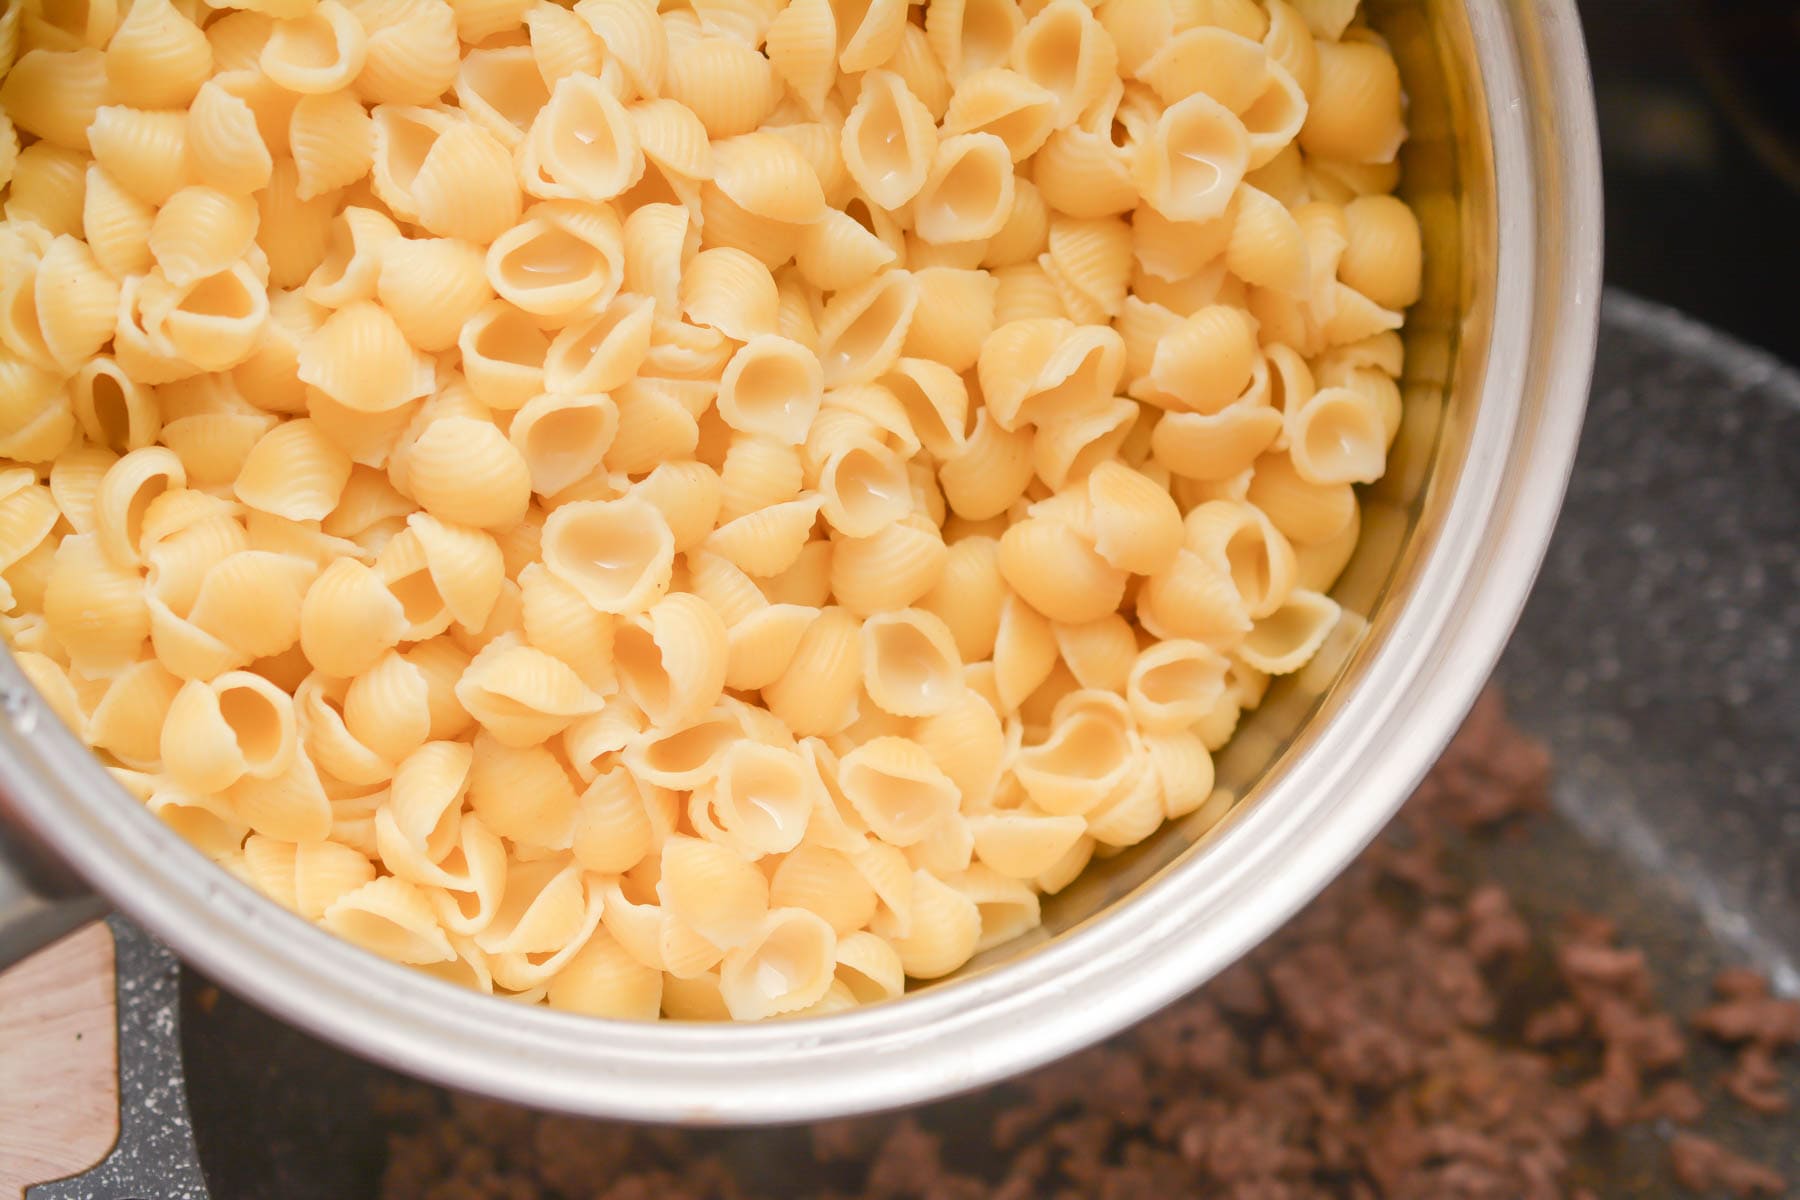 Add the ground beef, pasta, and ½ of the cheese.